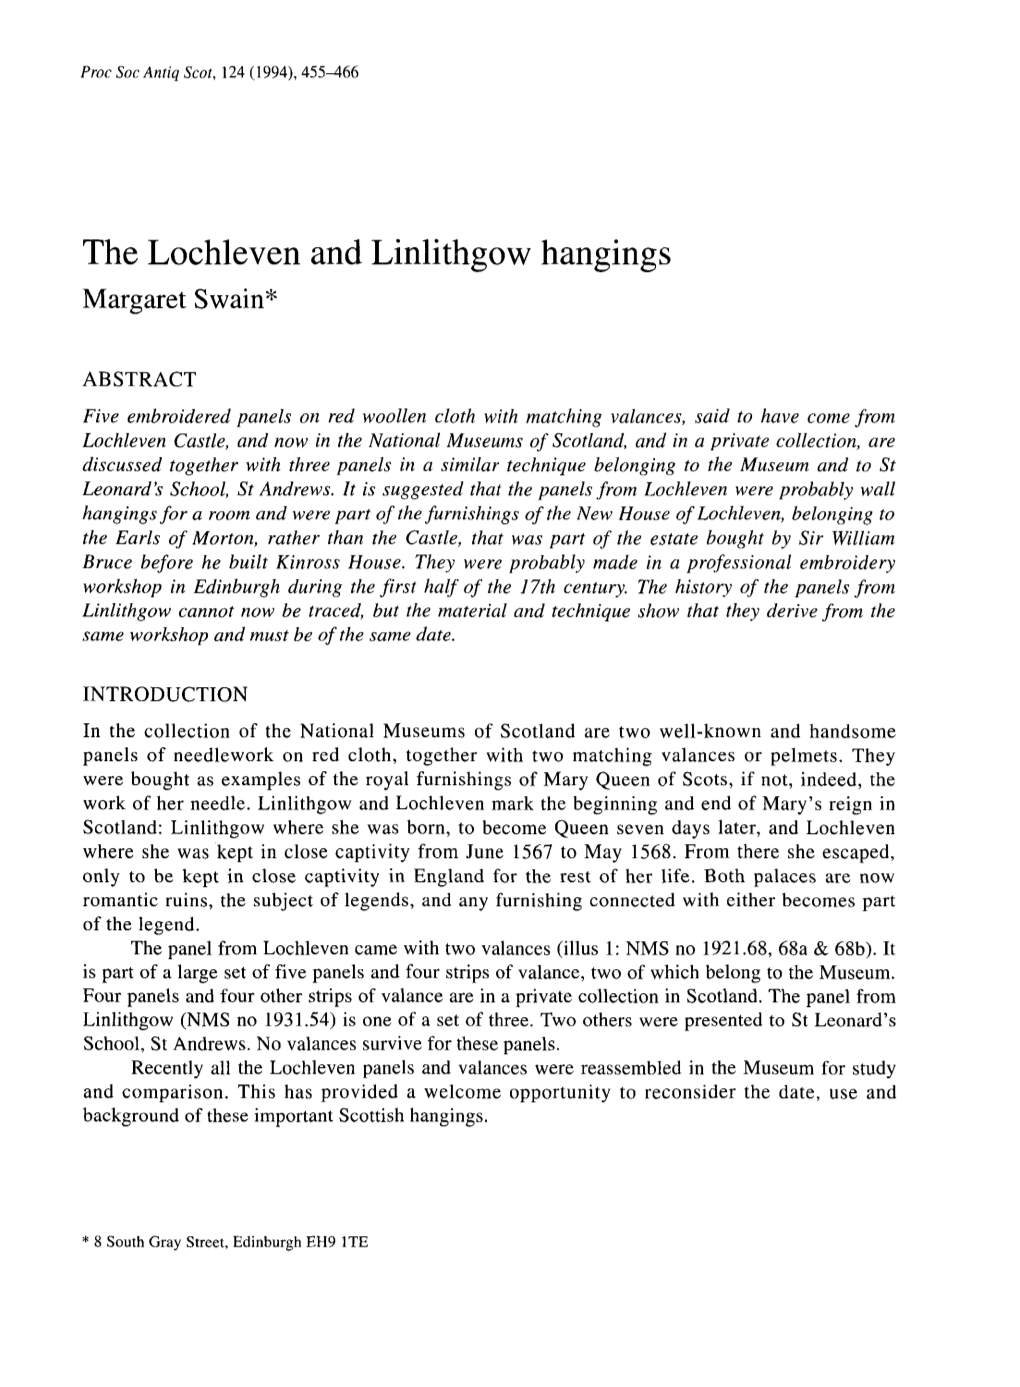 The Lochleven and Linlithgow Hangings I 459